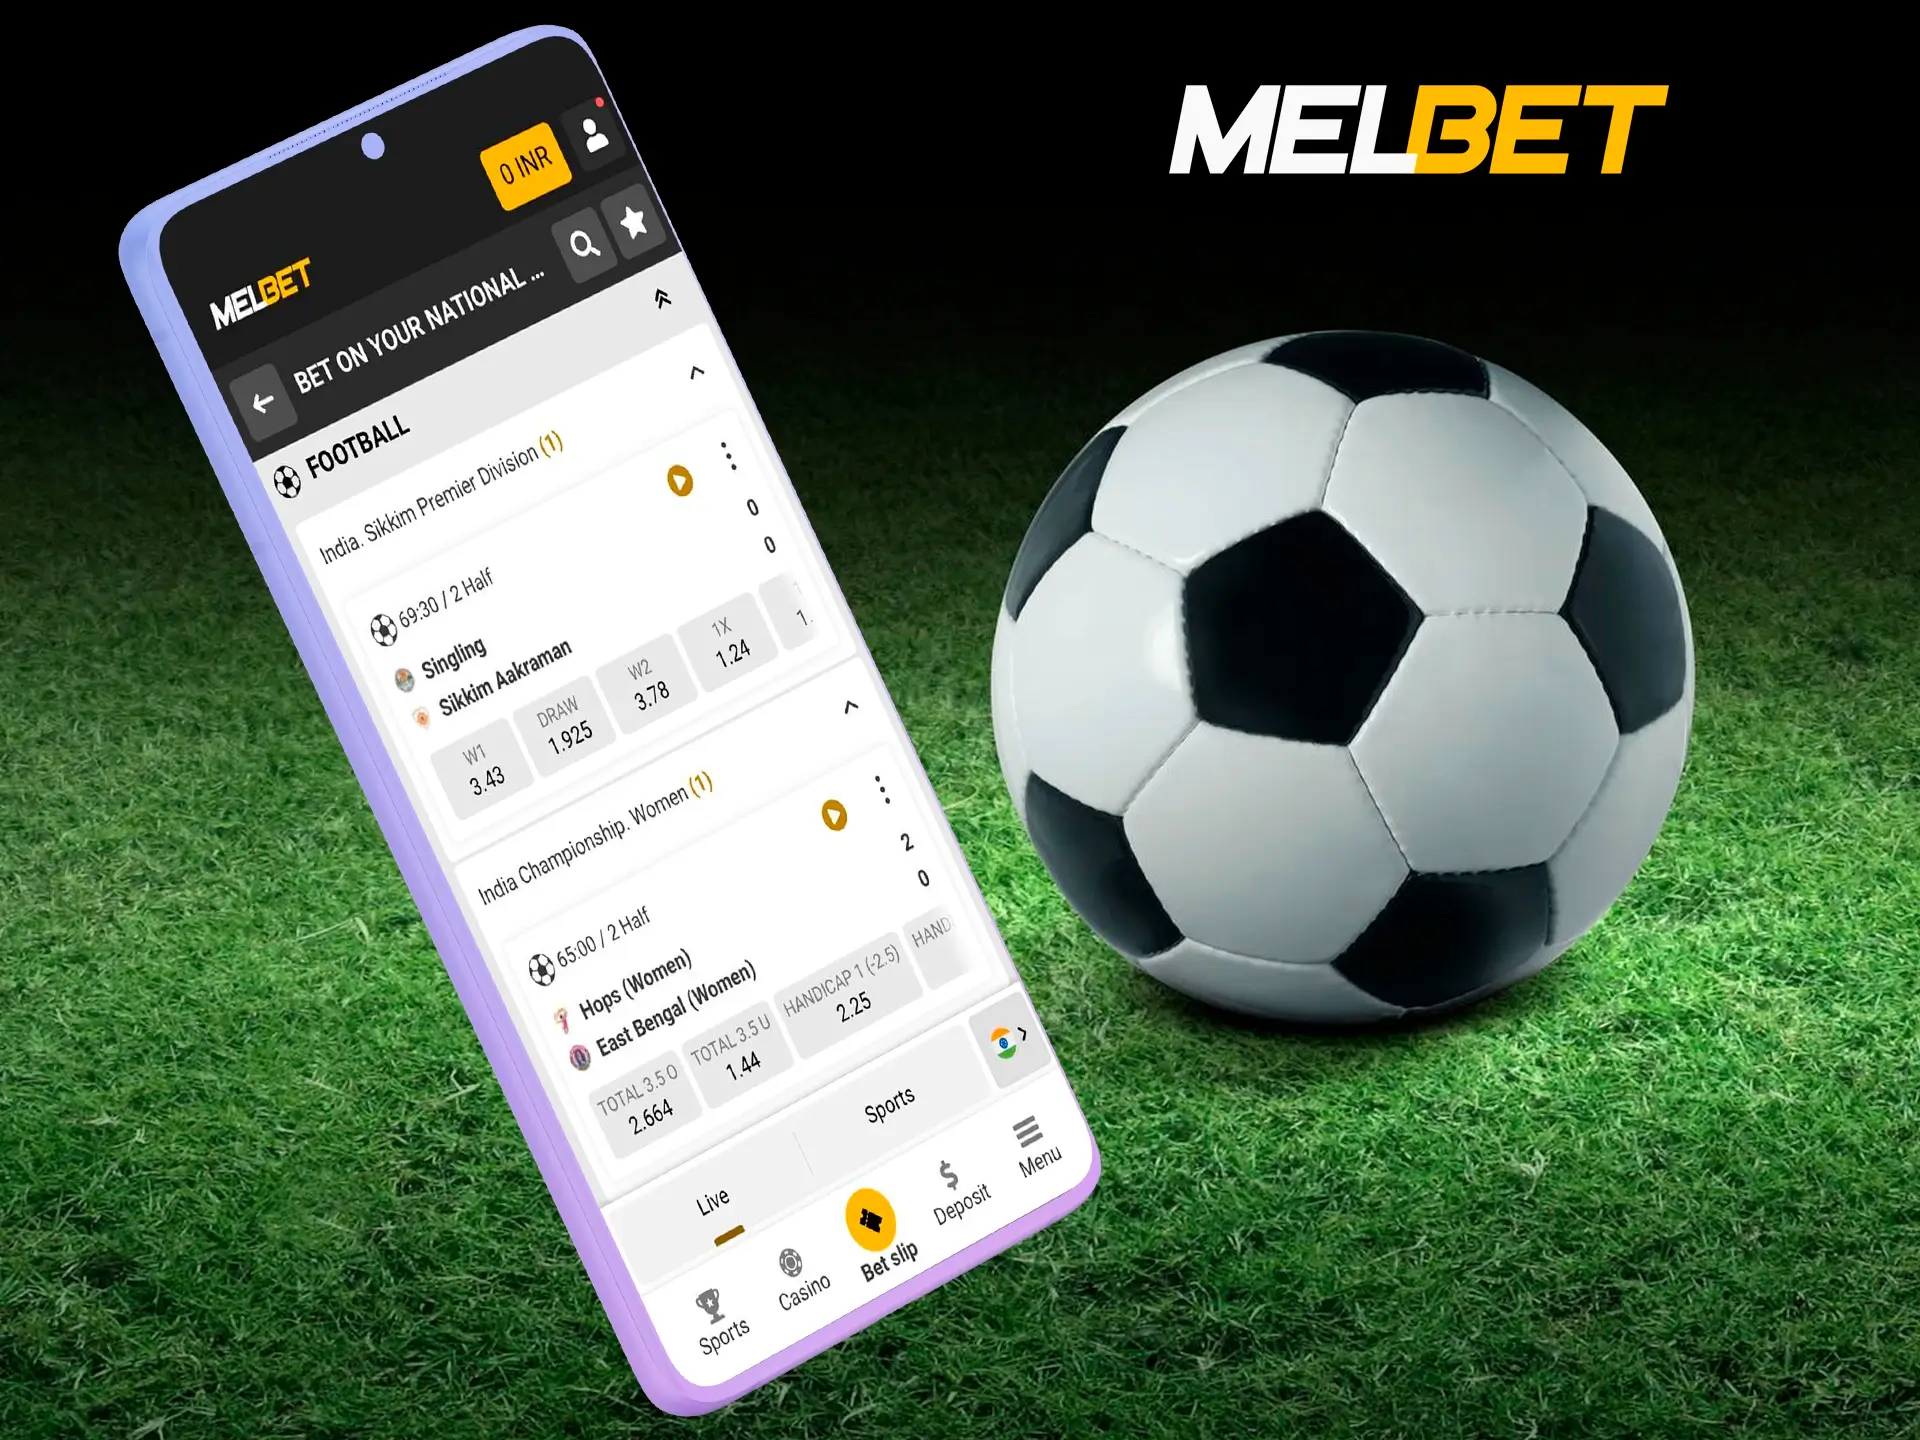 The high speed of the Melbet app allows you to place your bets quickly and profitably.